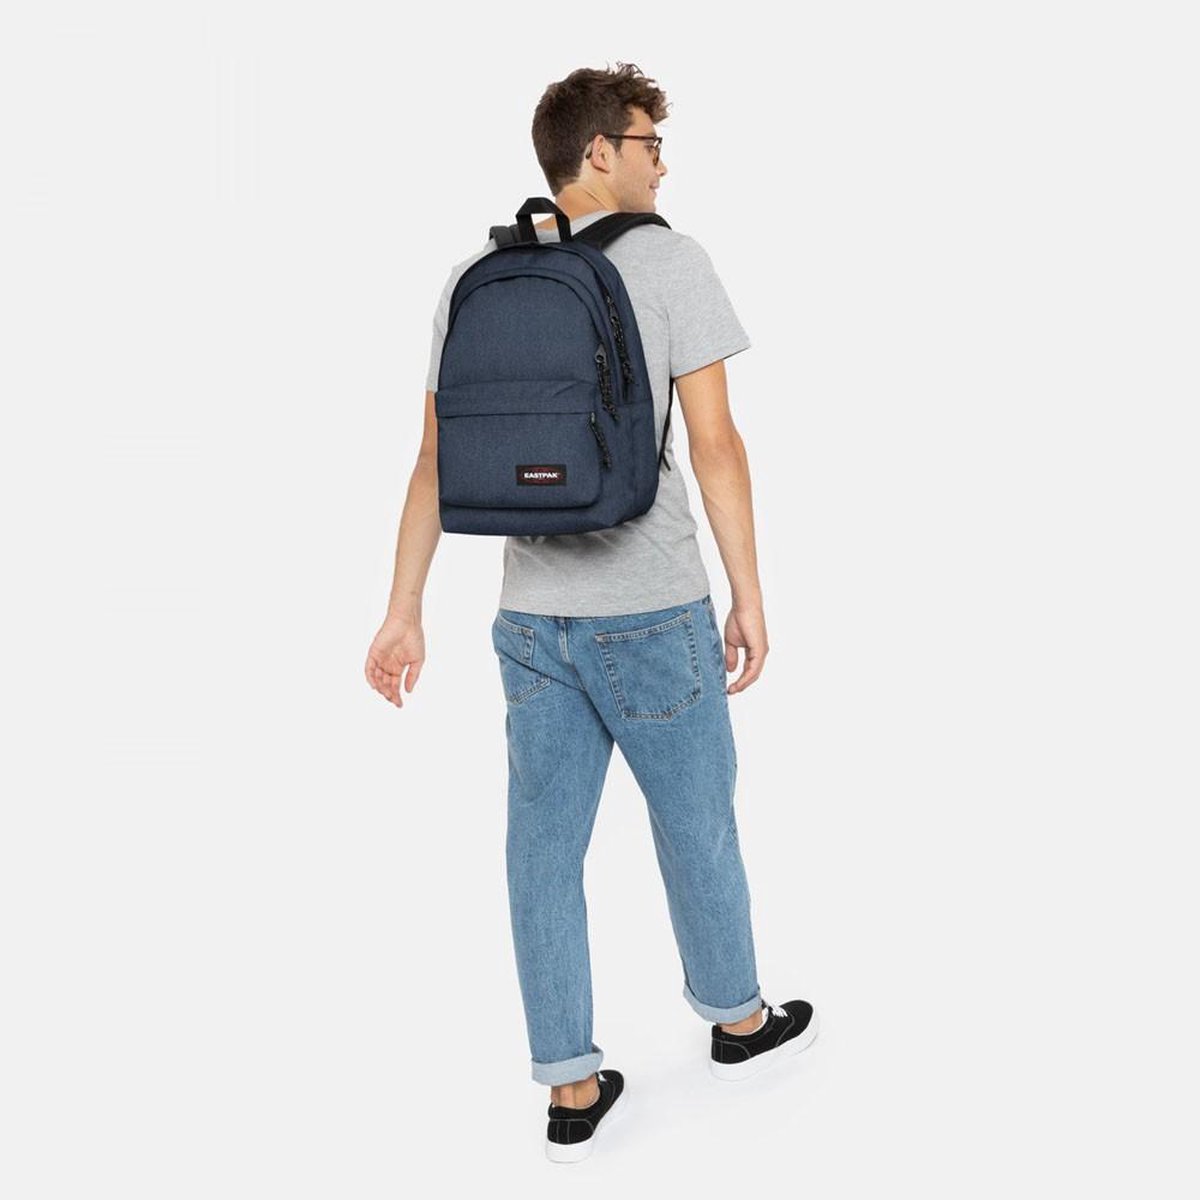 Eastpak Out of office 3.0 rugzak 13 inch double denim | bol.com